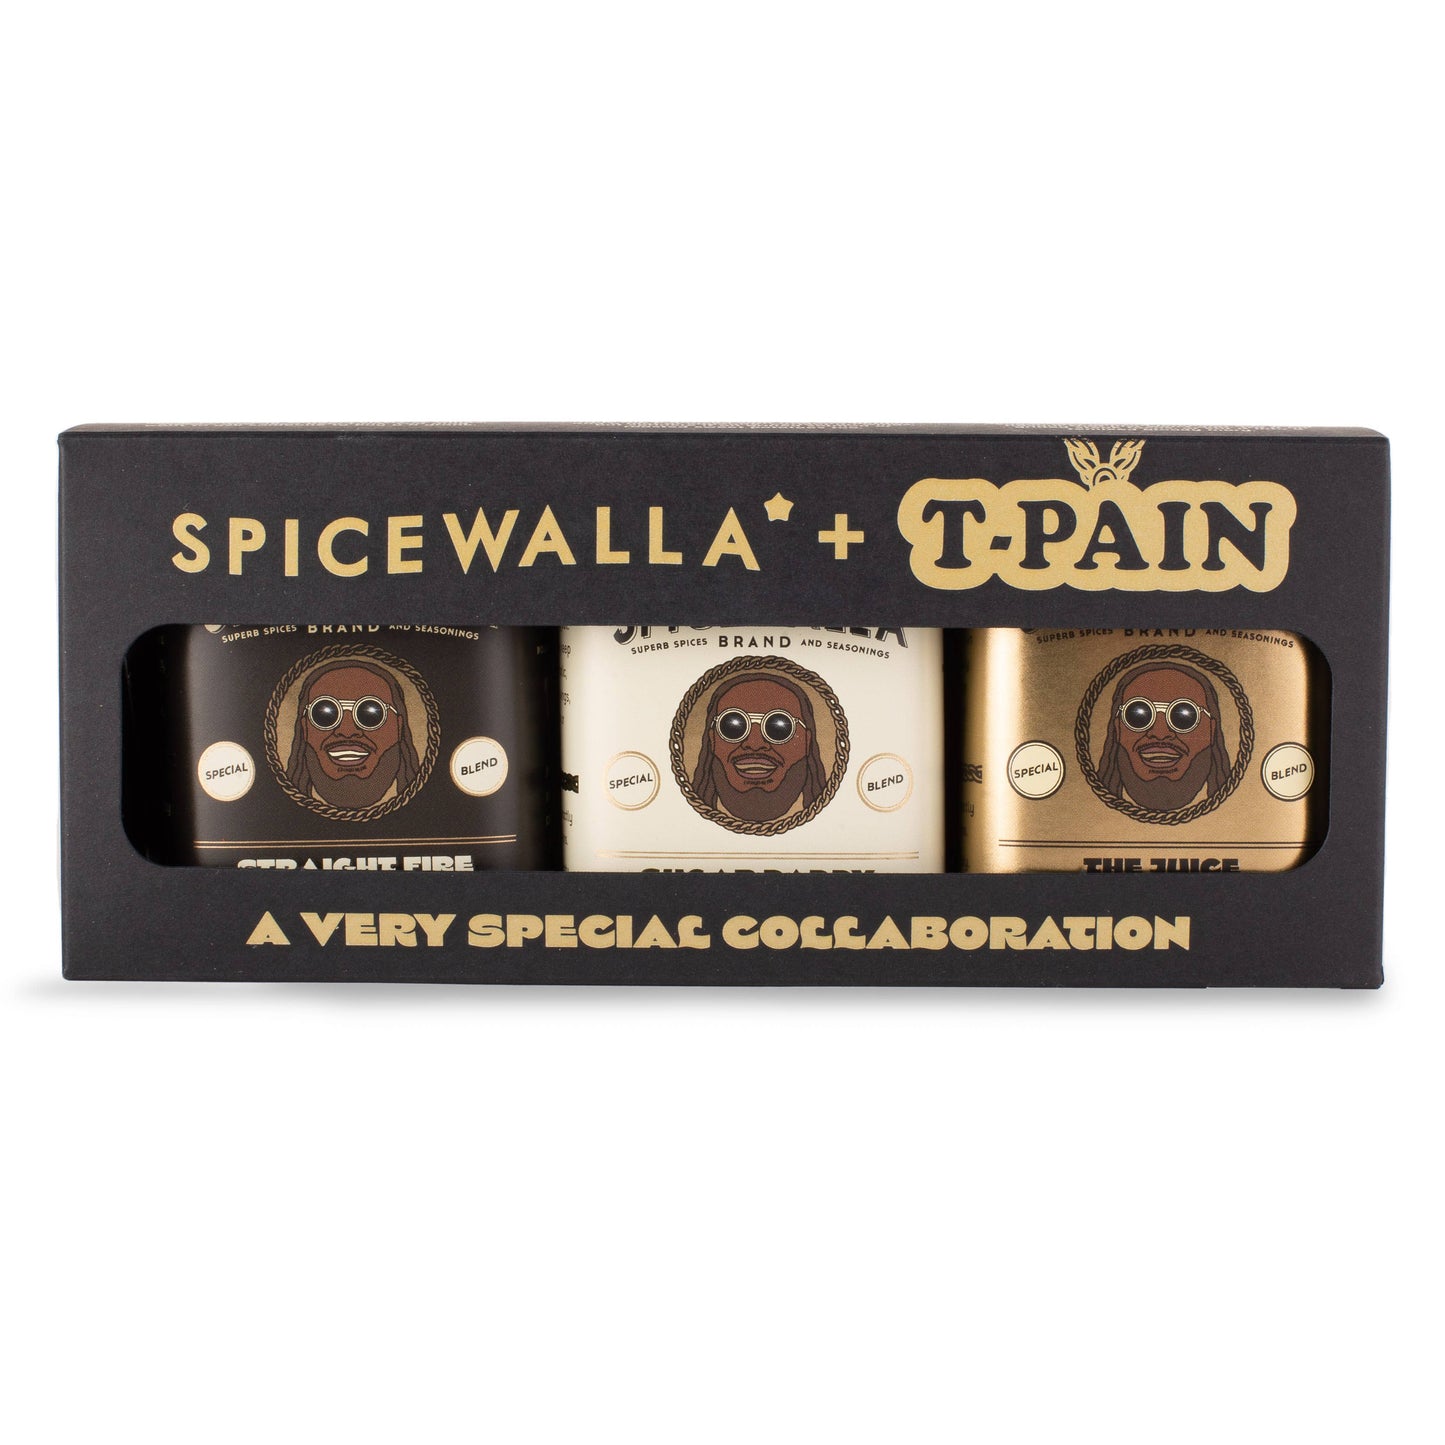 Spicewalla - T-Pain Dry Rub Wing Collection